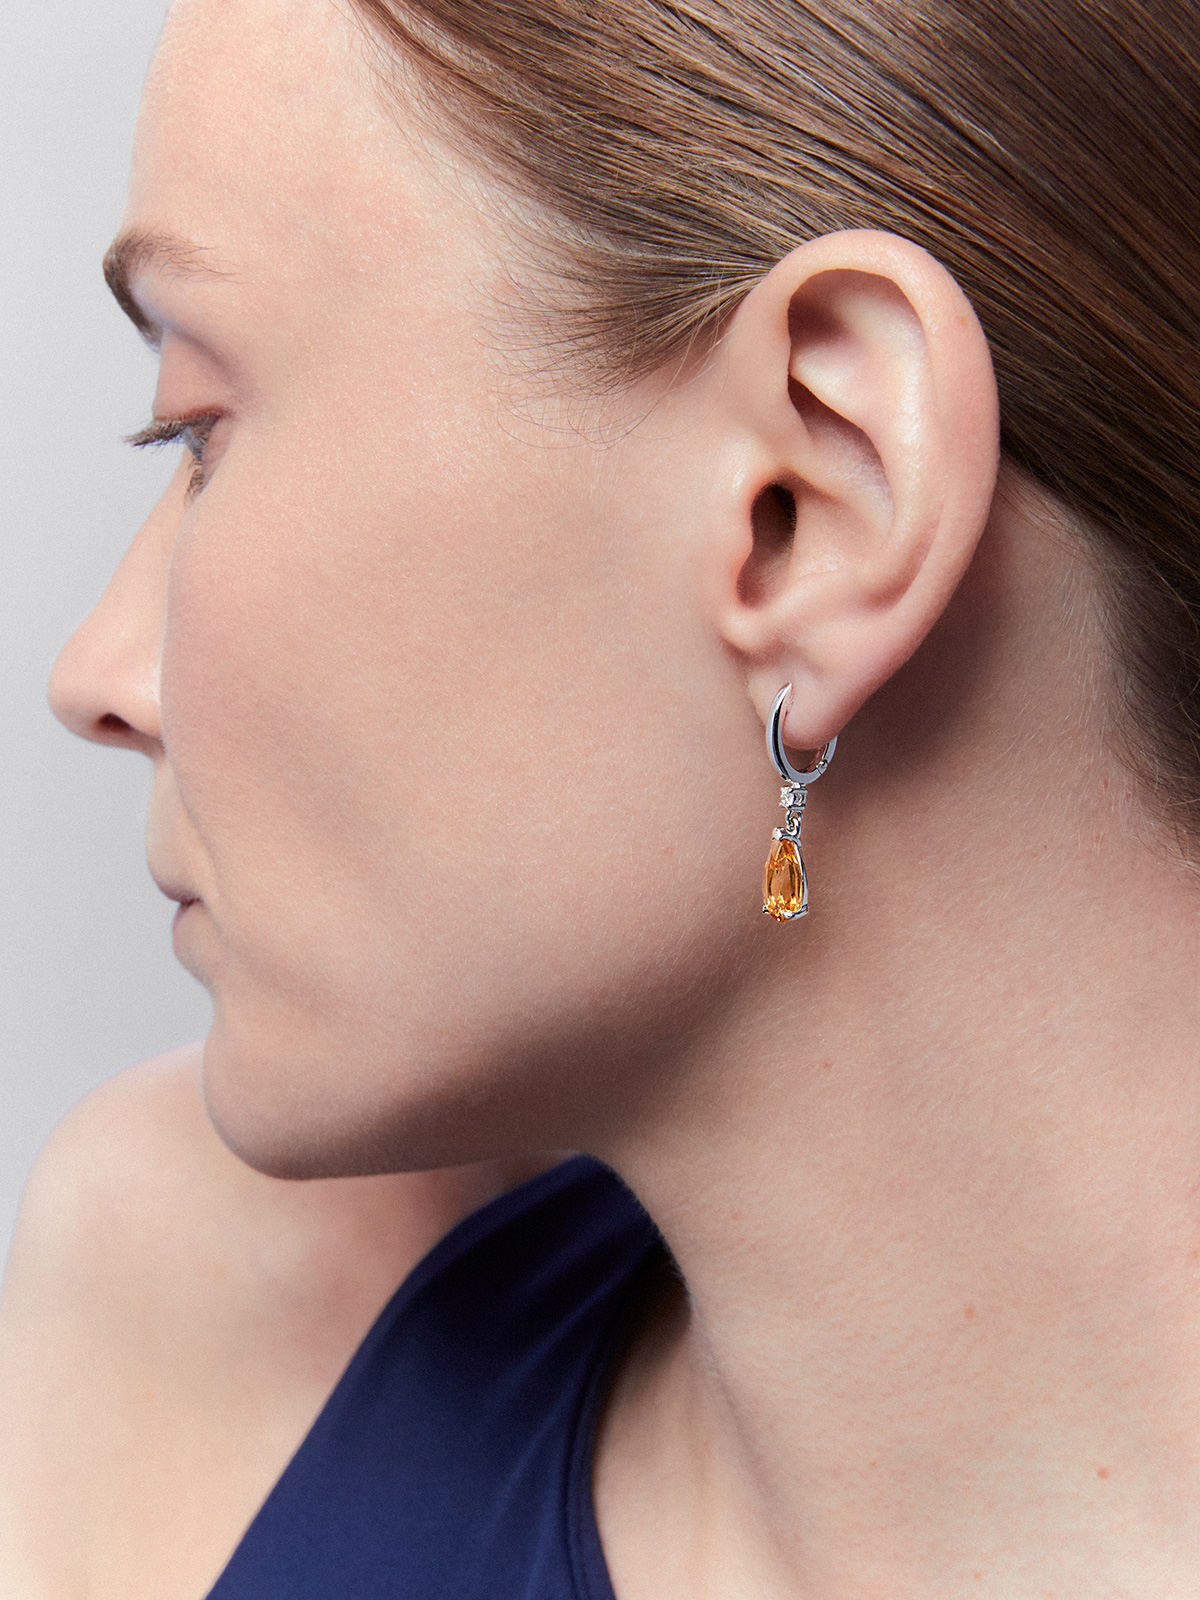 925 Silver hoop earrings with citrine and hanging diamond